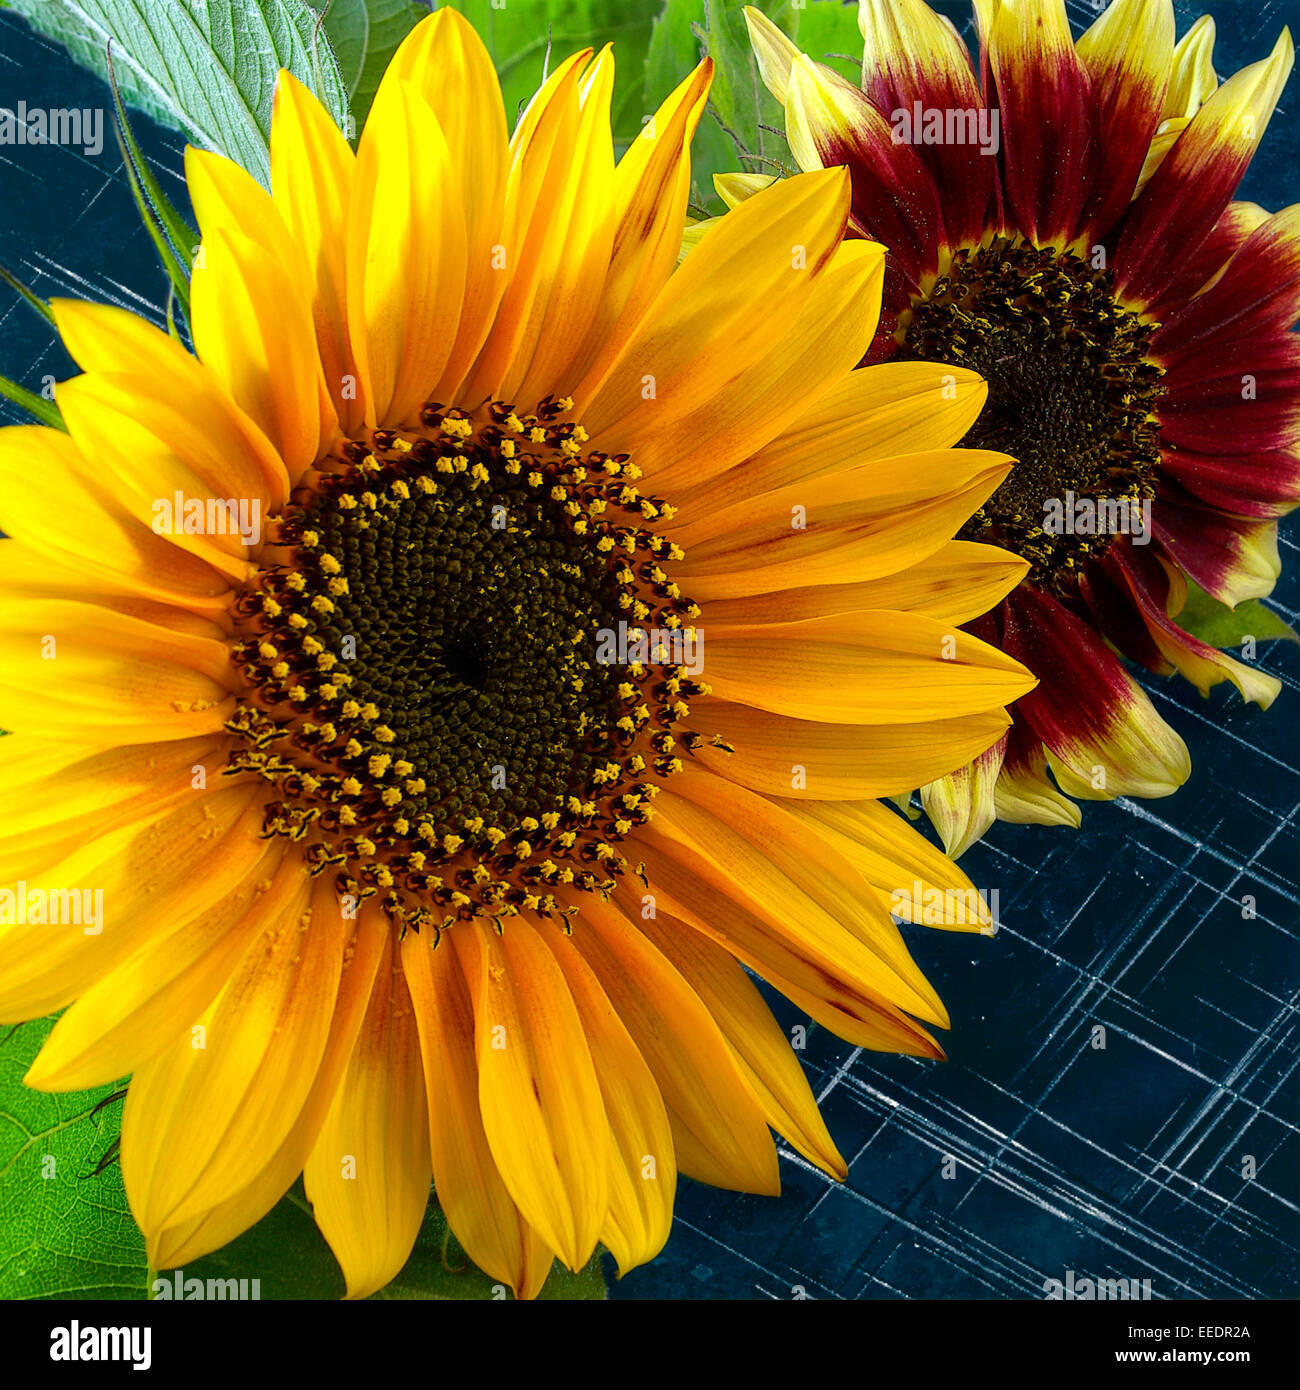 Two sunflowers over blue background. Stock Photo